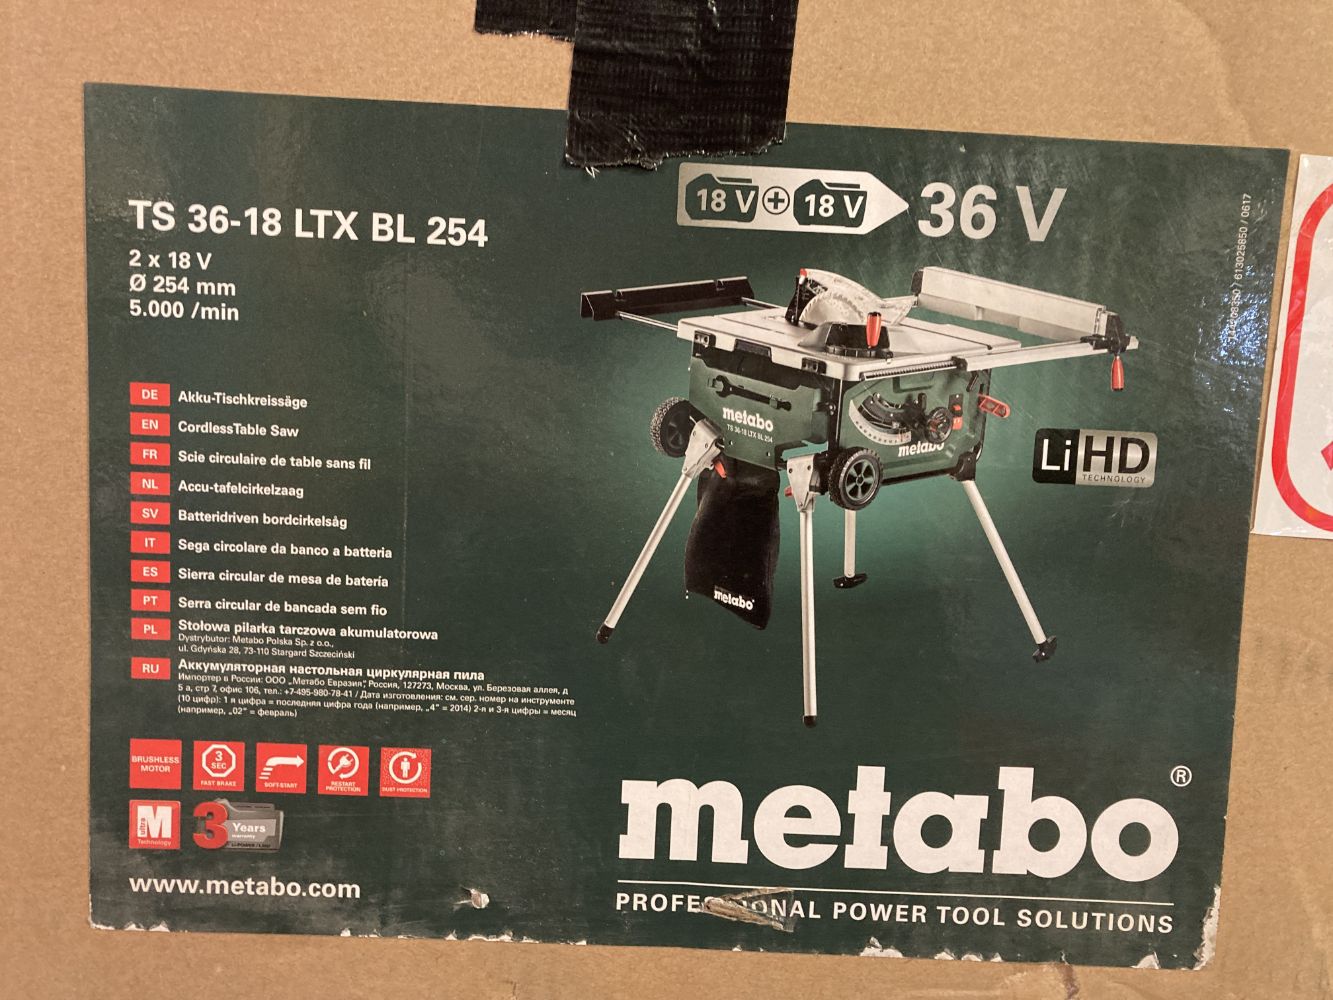 Hardware & Tools Sale | Transformers | Table Saw | Hammer Drills, Grinders & more | Makes: Metabo, Milwaukee, DeWalt and others | Ends 04 Oct